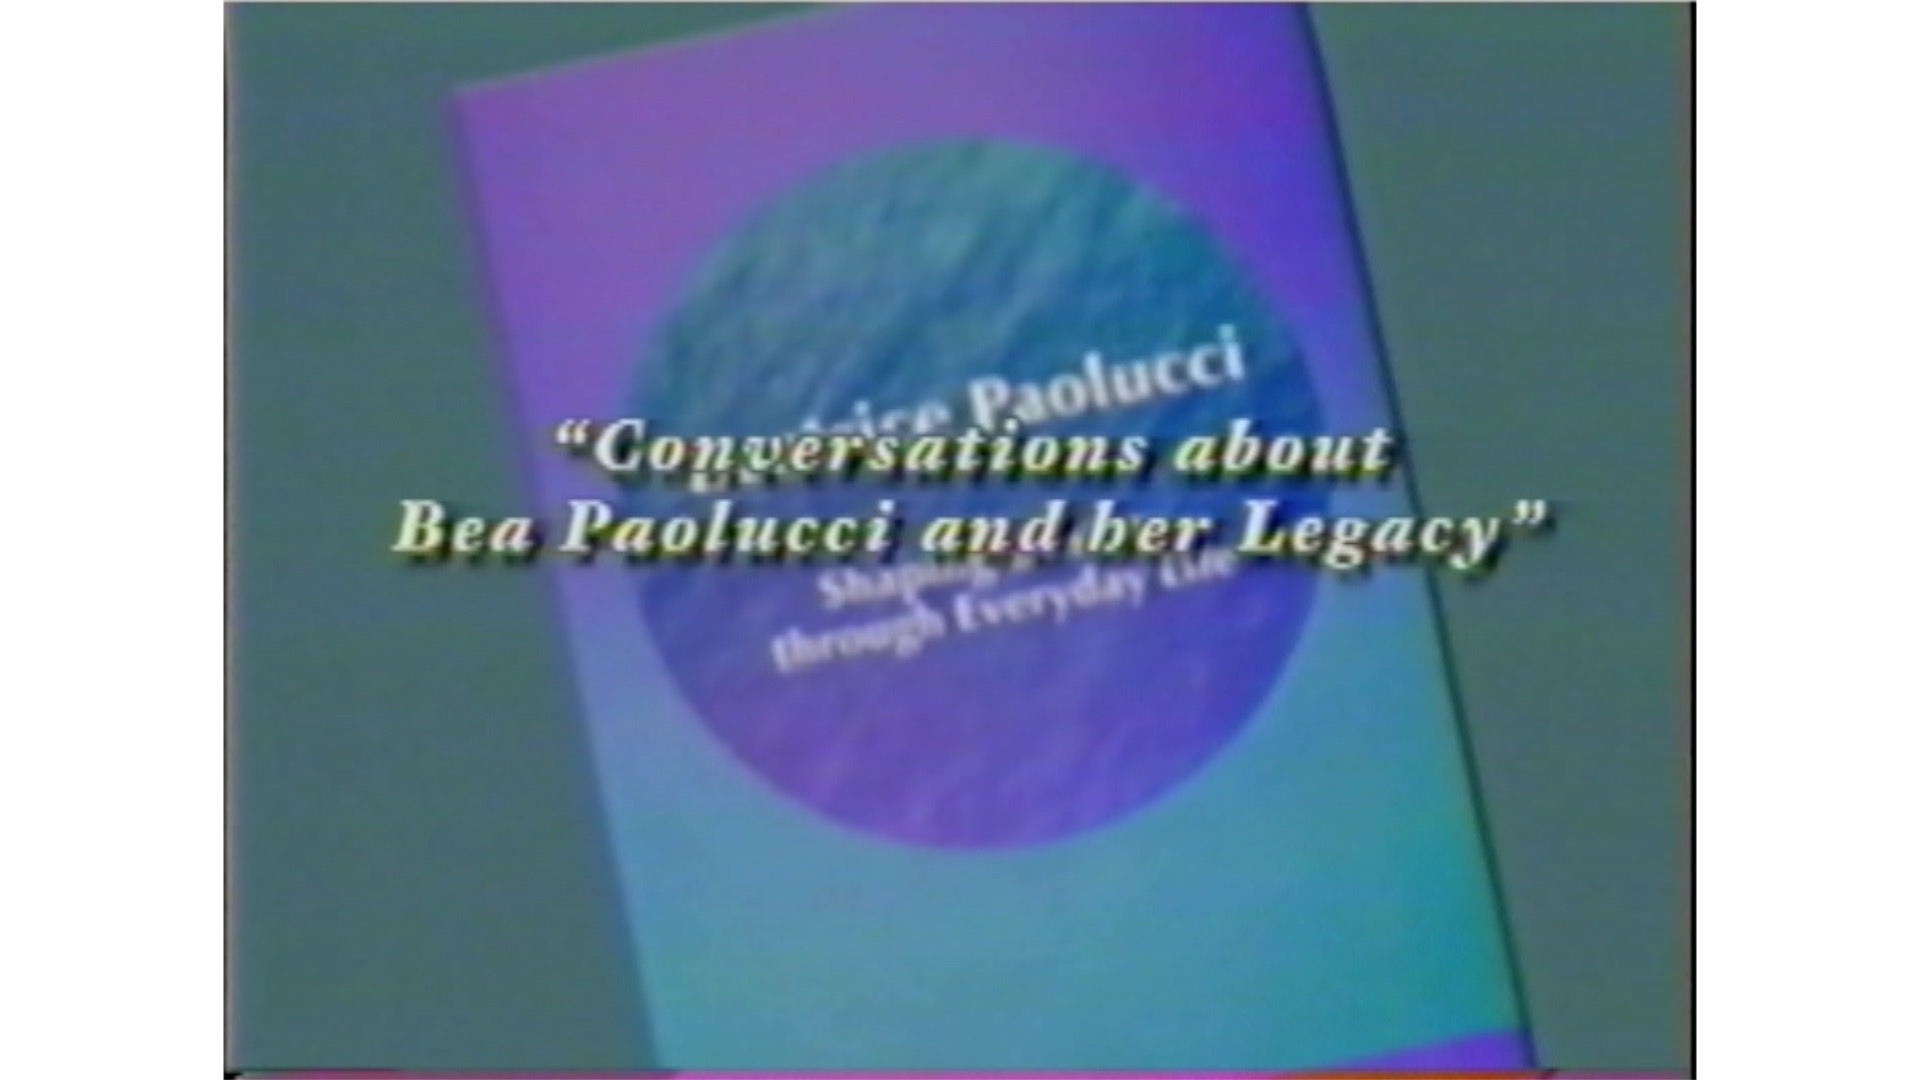 Conversations about Bea Paolucci and her Legacy, 2002